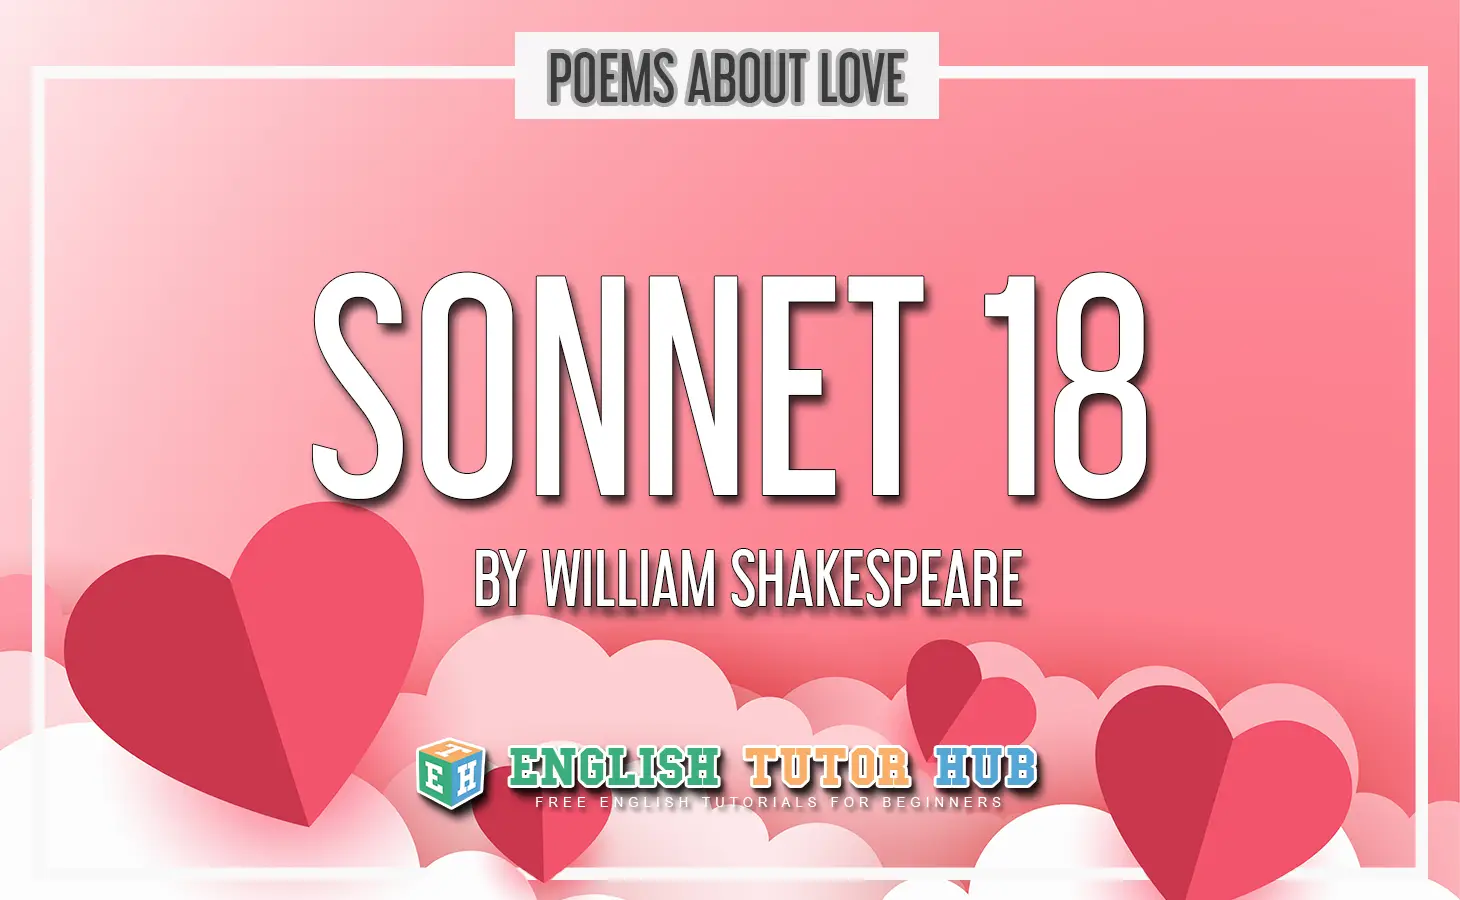 Sonnet 18 by William Shakespeare - Summary and Meaning [2022]